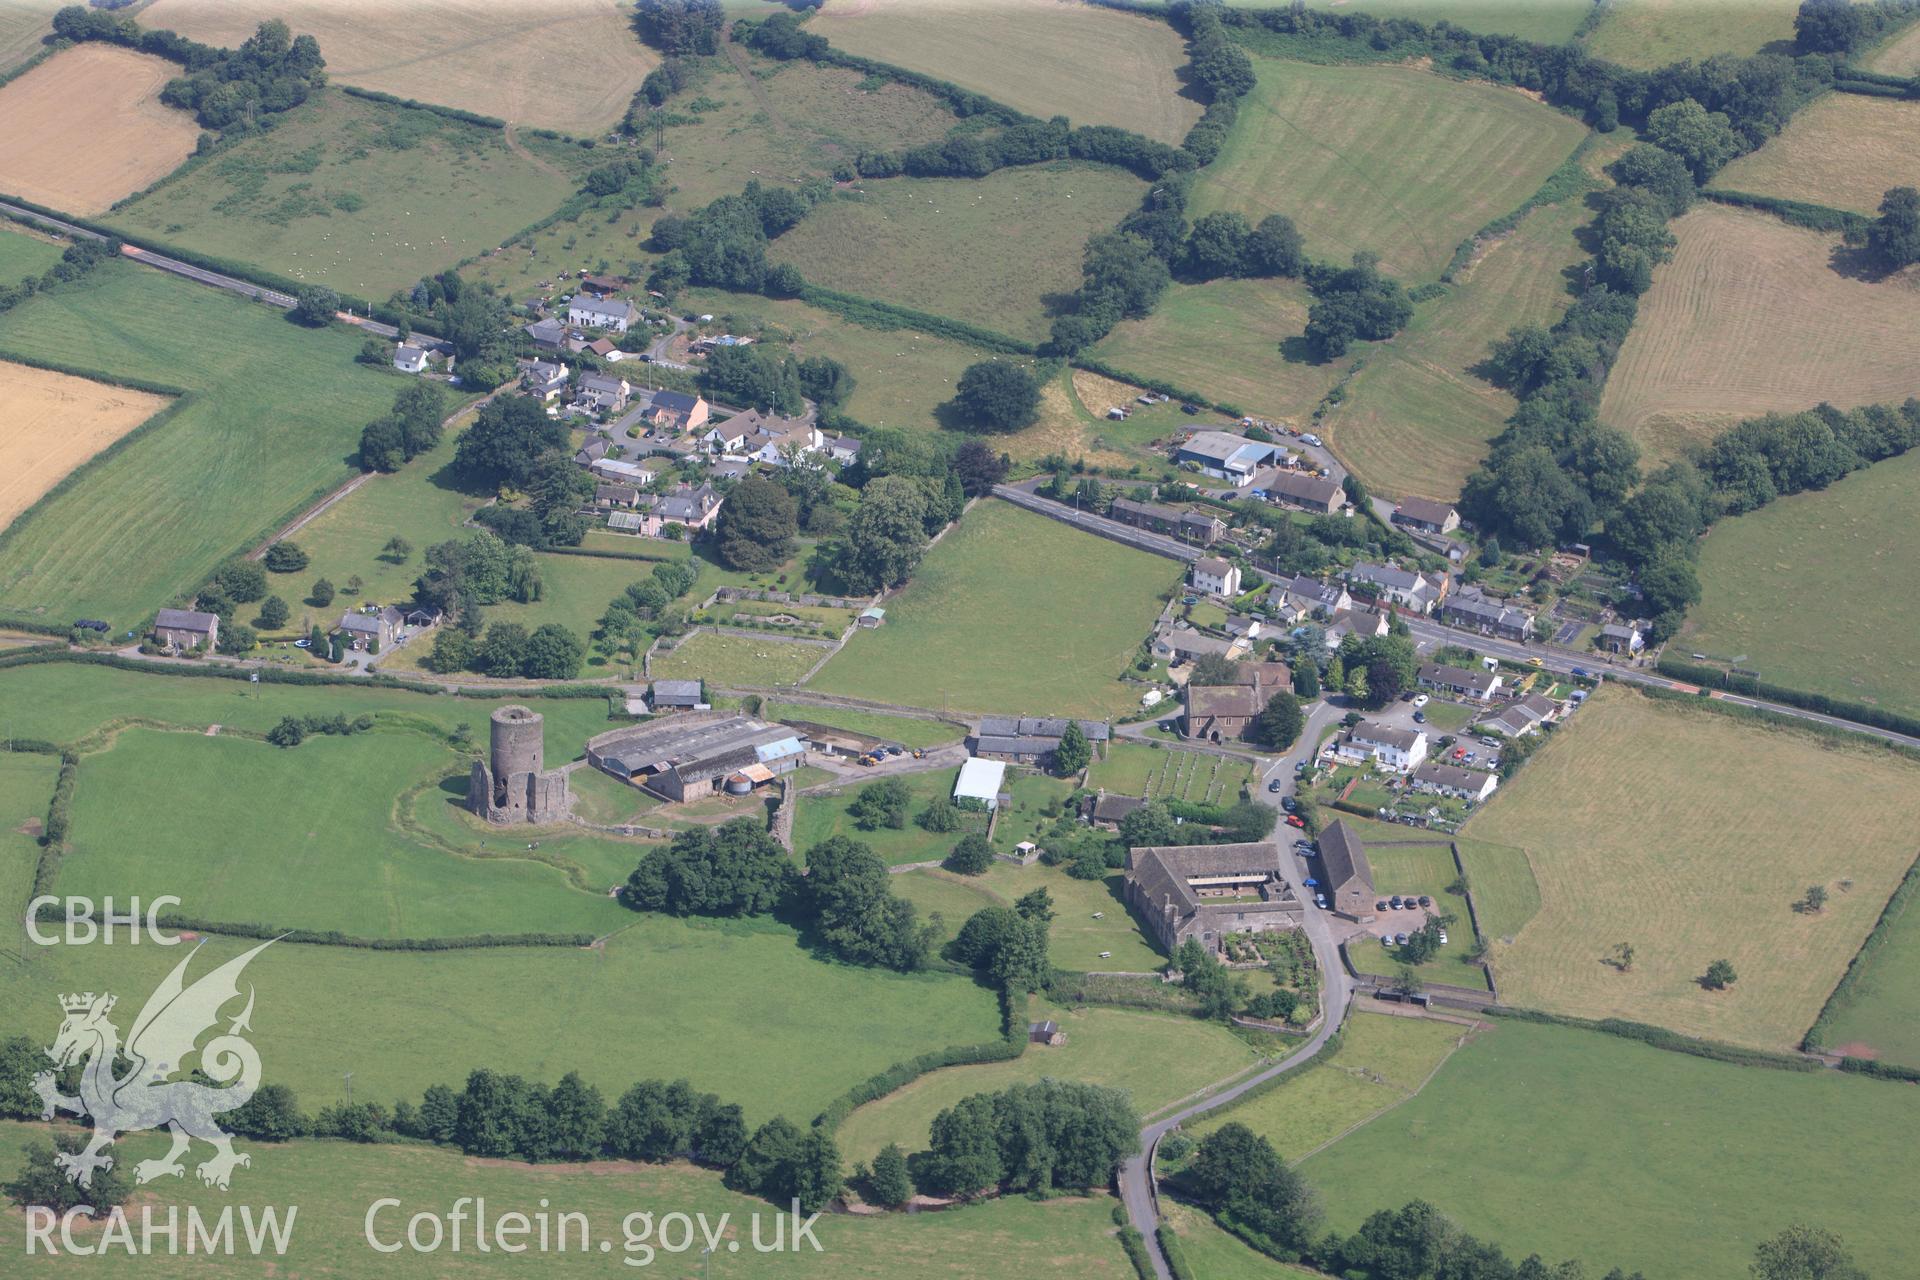 St. John's church; Zoar Independent Chapel; Tretower Shrunken Settlement; Tretower Castle, Court and Court Barn and Ty Llys Farm, Tretower, between Abergavenny and Brecon. Oblique aerial photograph taken during Royal Commission?s programme of archaeological aerial reconnaissance by Toby Driver on 1st August 2013.